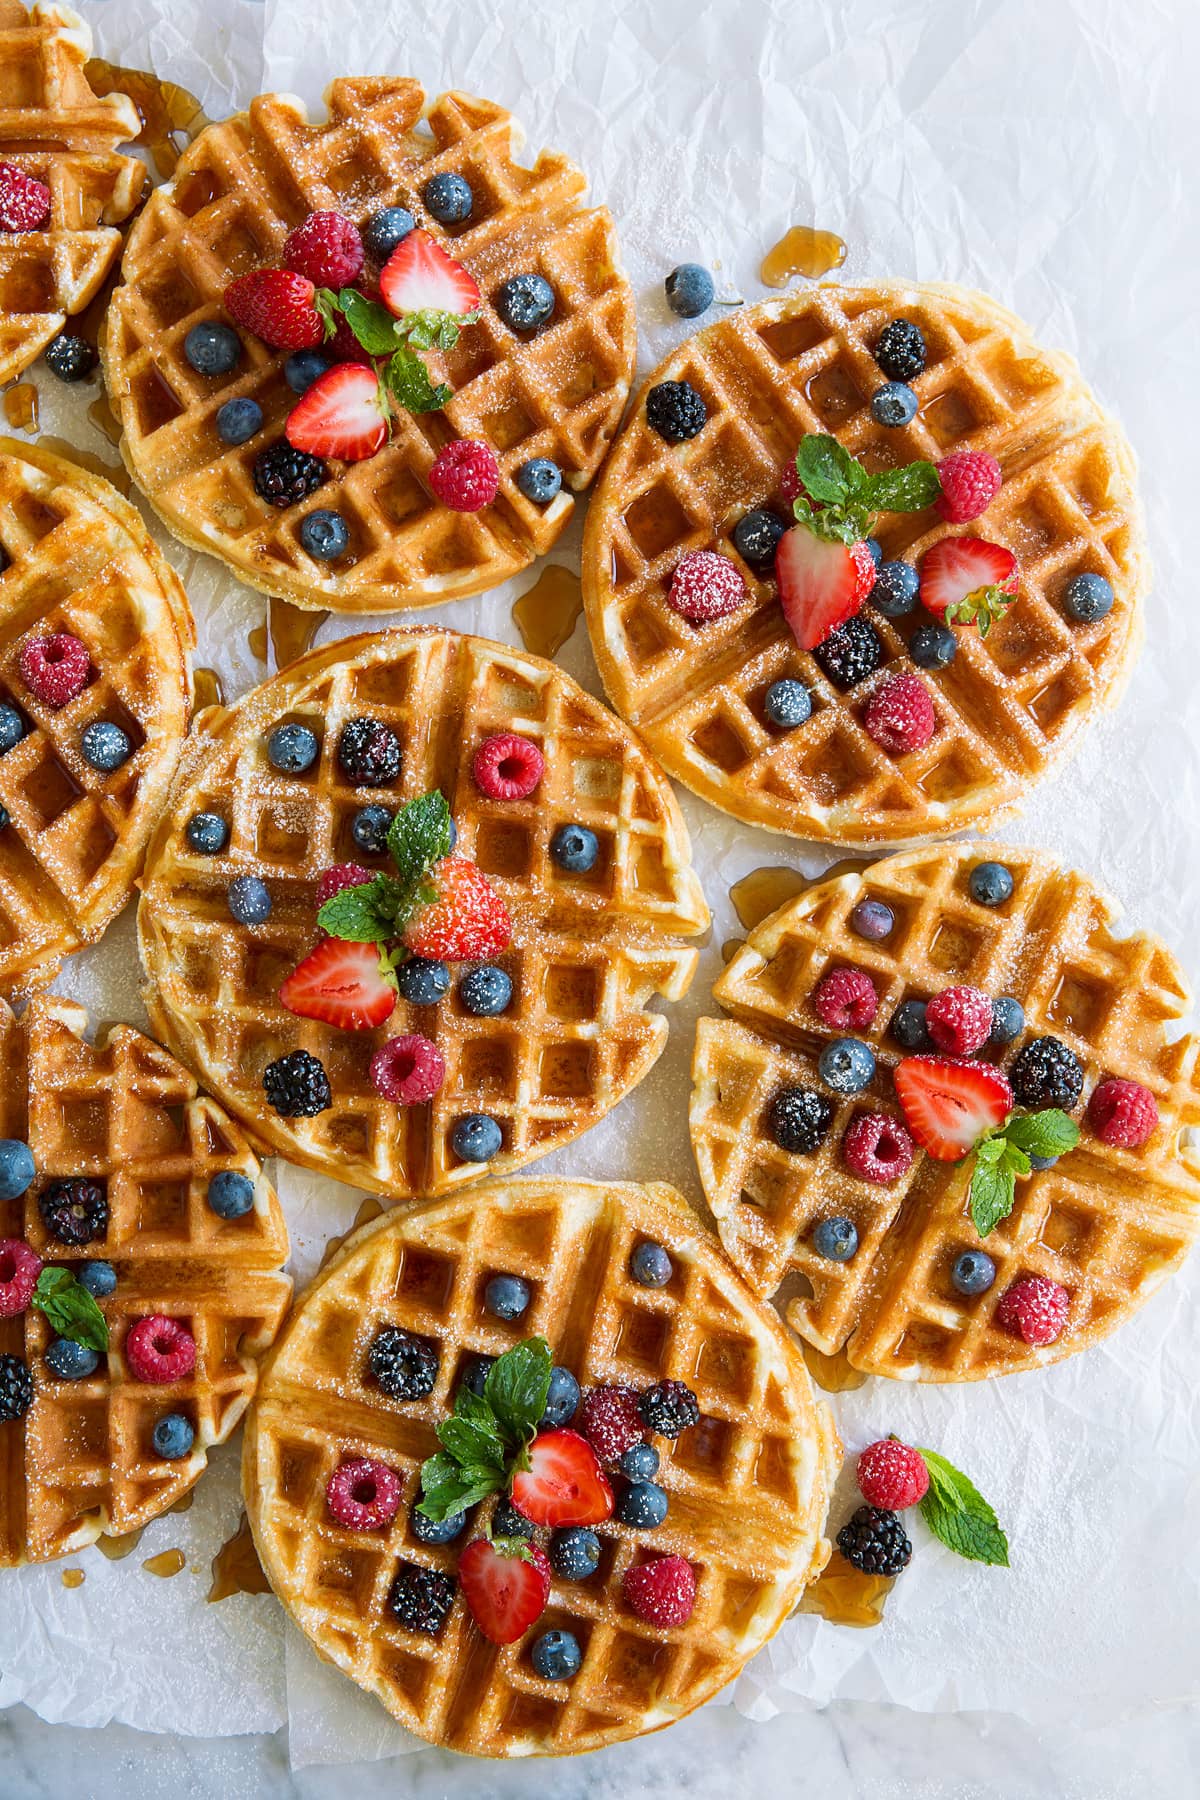 Eight Belgian Waffles topped with berries and maple syrup.